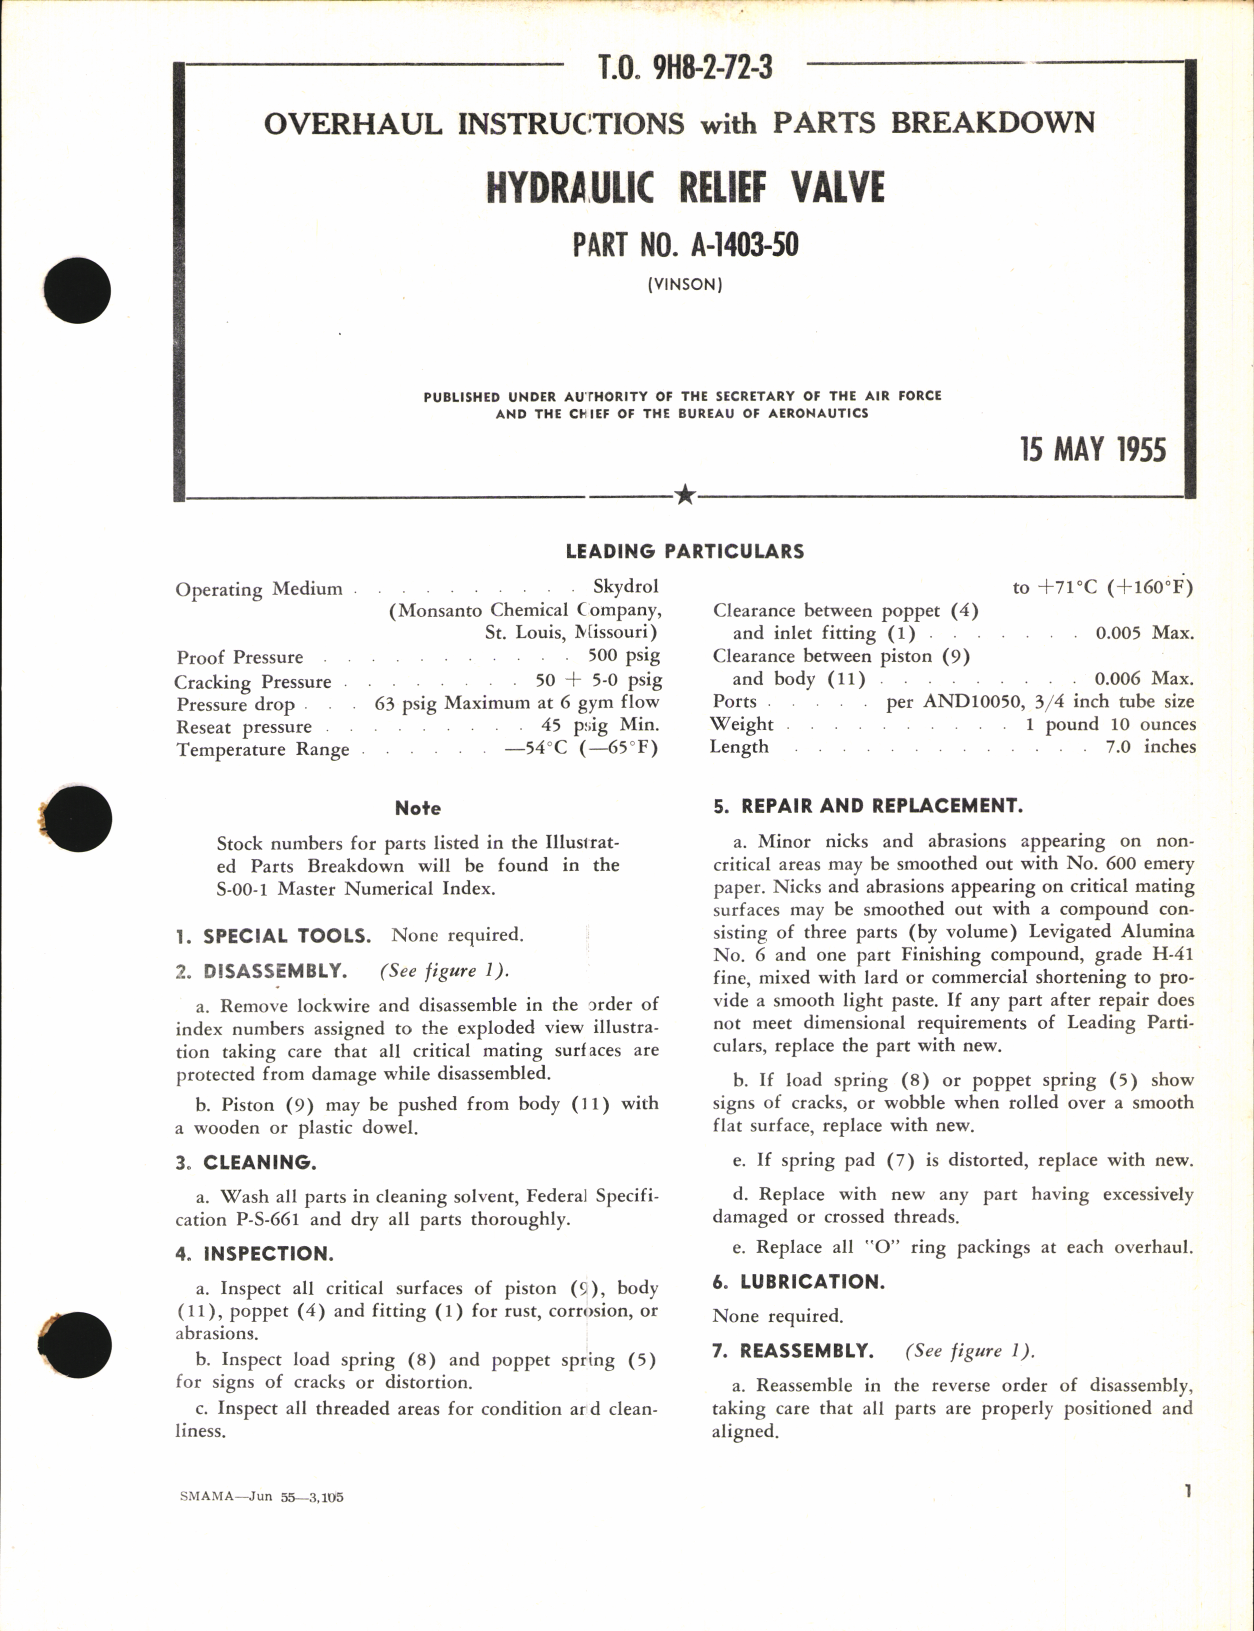 Sample page 1 from AirCorps Library document: Overhaul Instructions with Parts Breakdown for Hydraulic Relief Valve Part No. A-1403-50